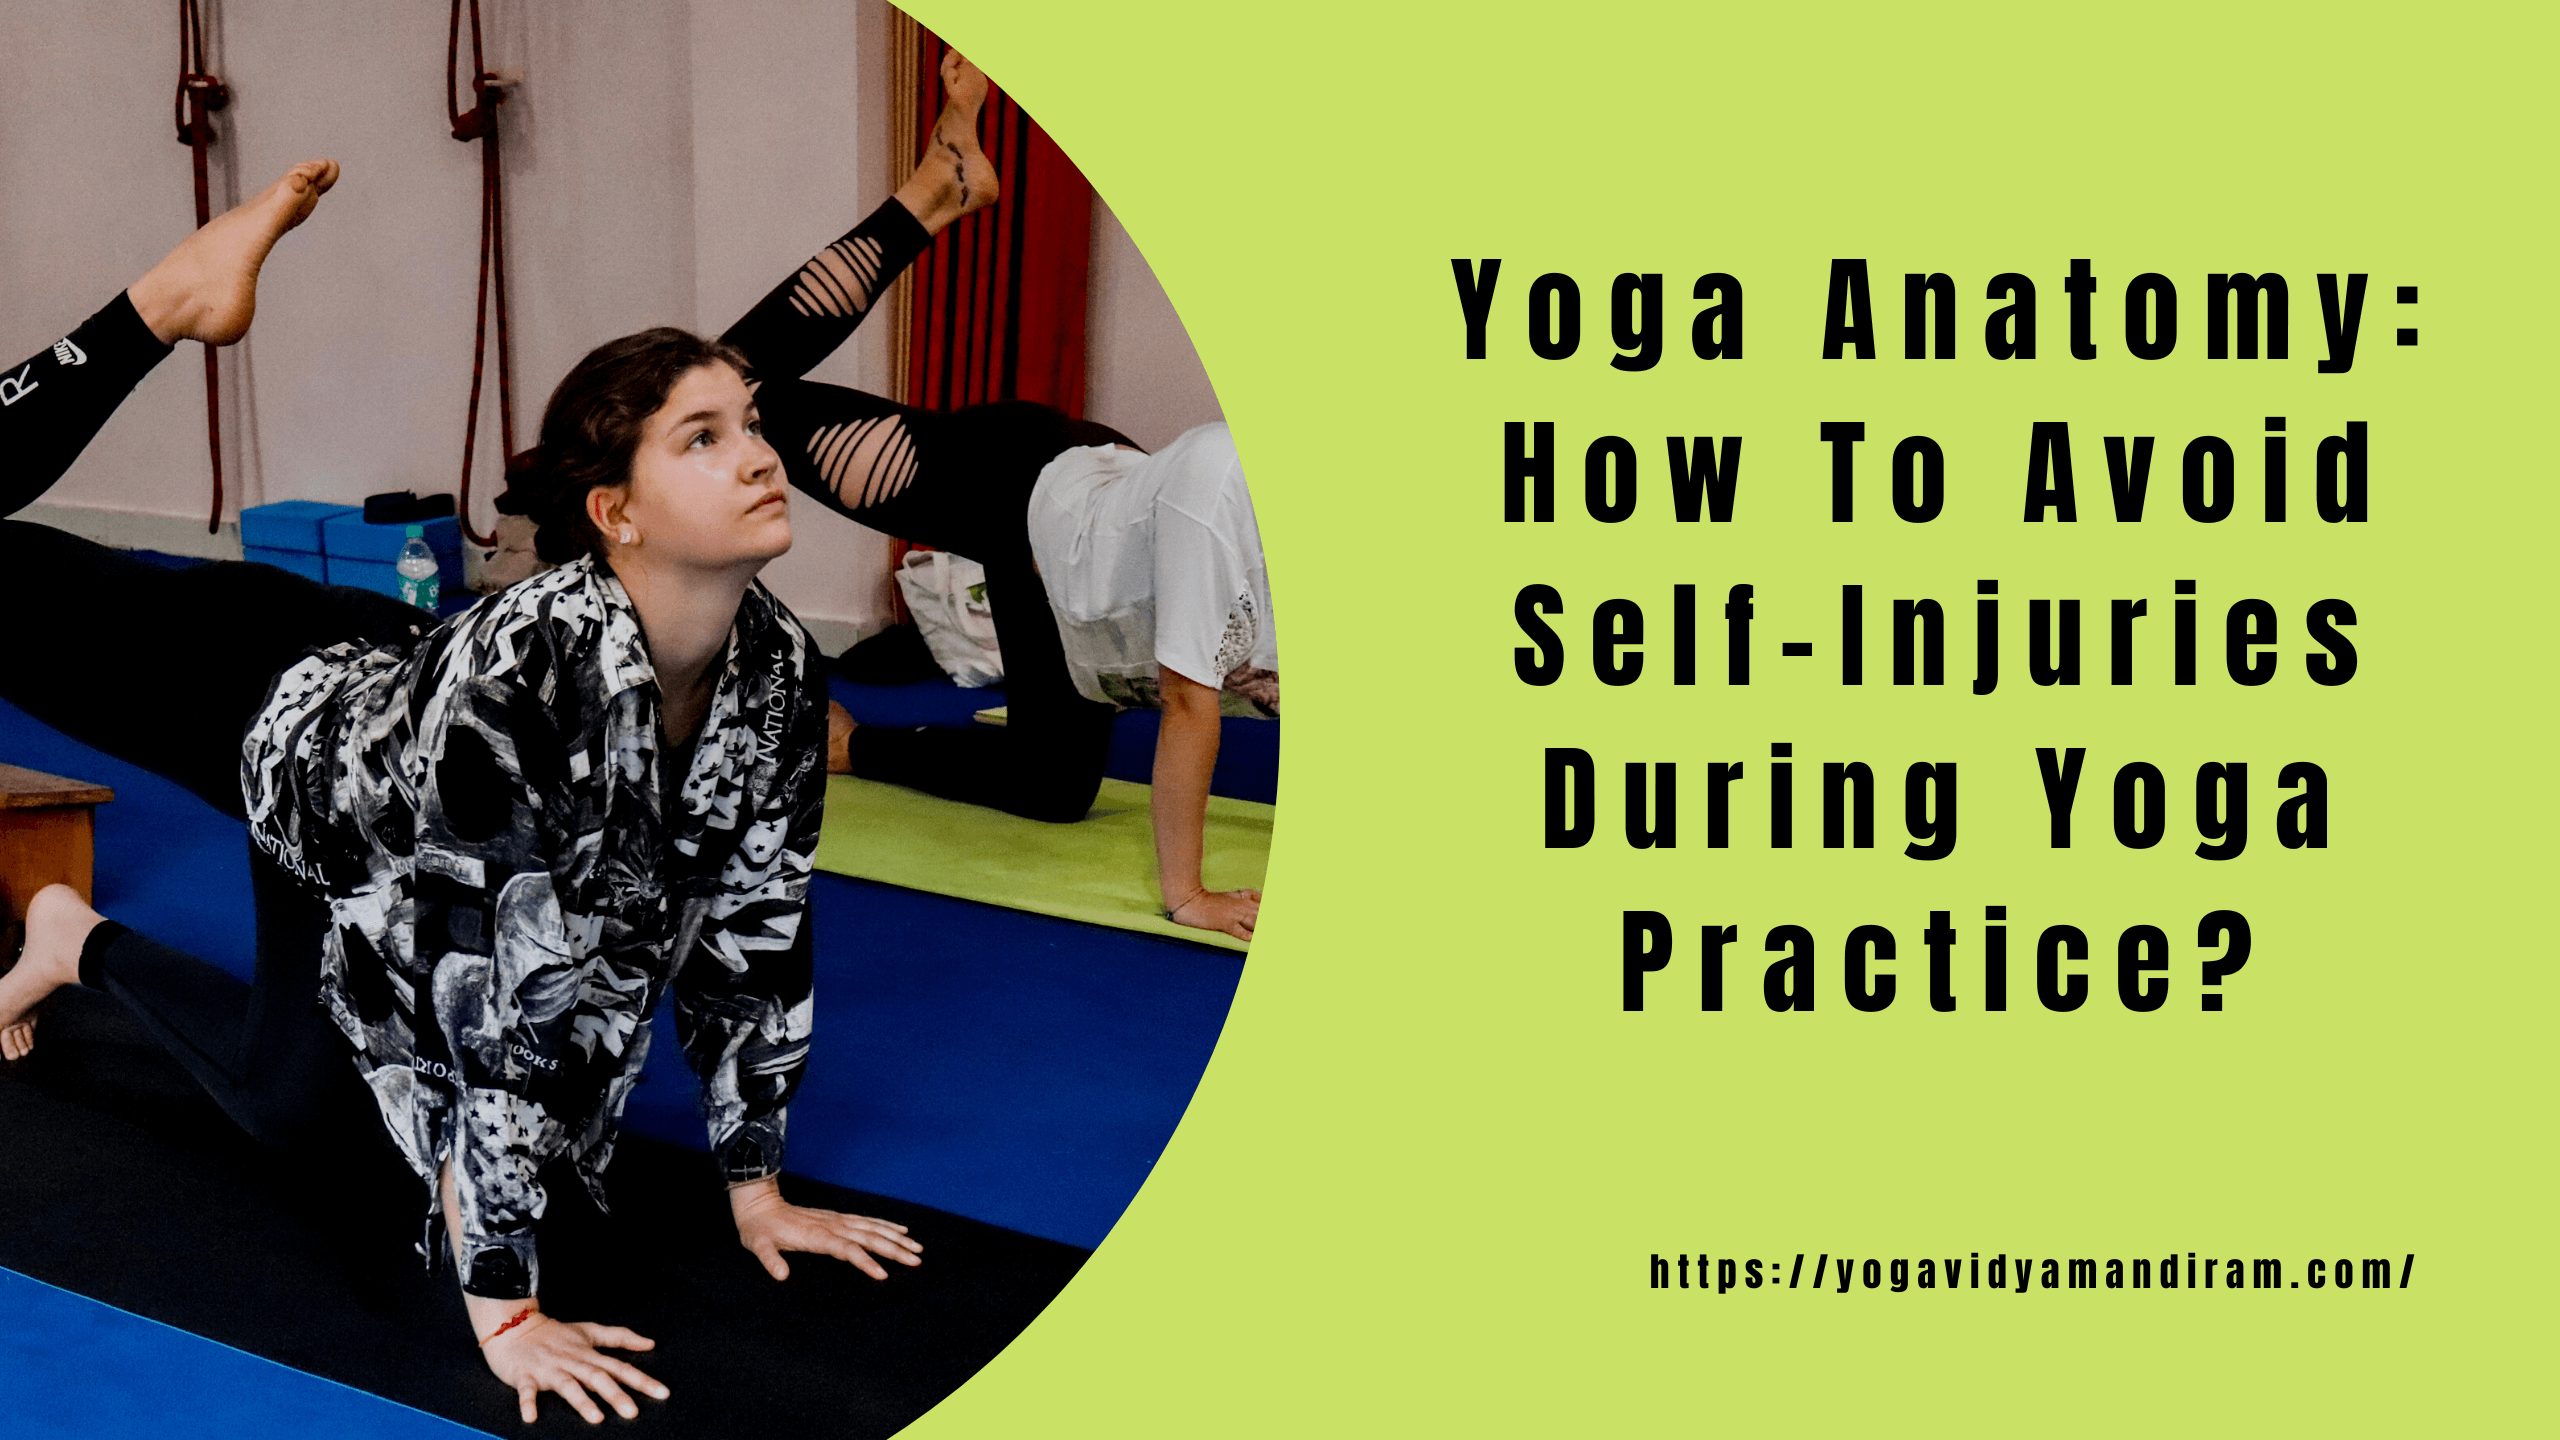 Yoga Anatomy: How To Avoid Self-Injuries During Yoga Practice?